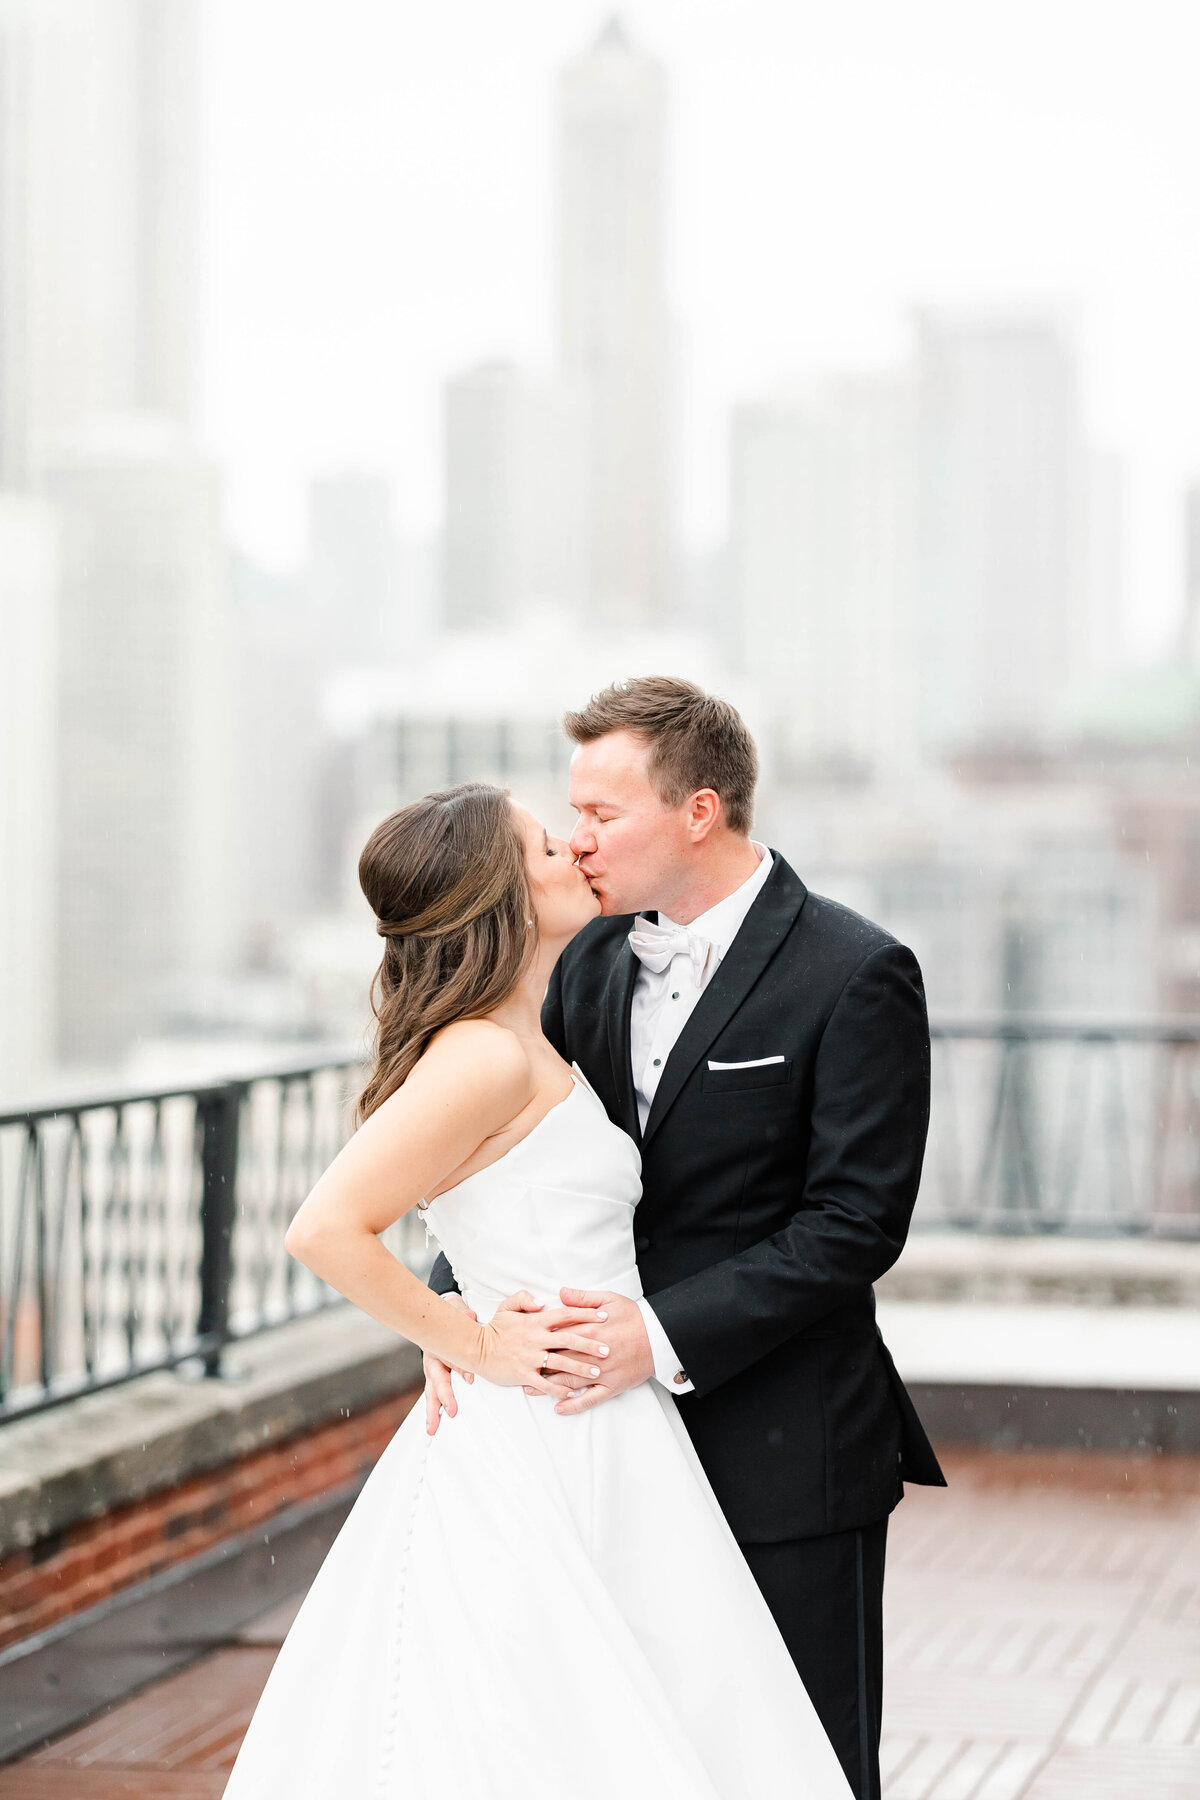 Chicago Rooftop Wedding Photography457857